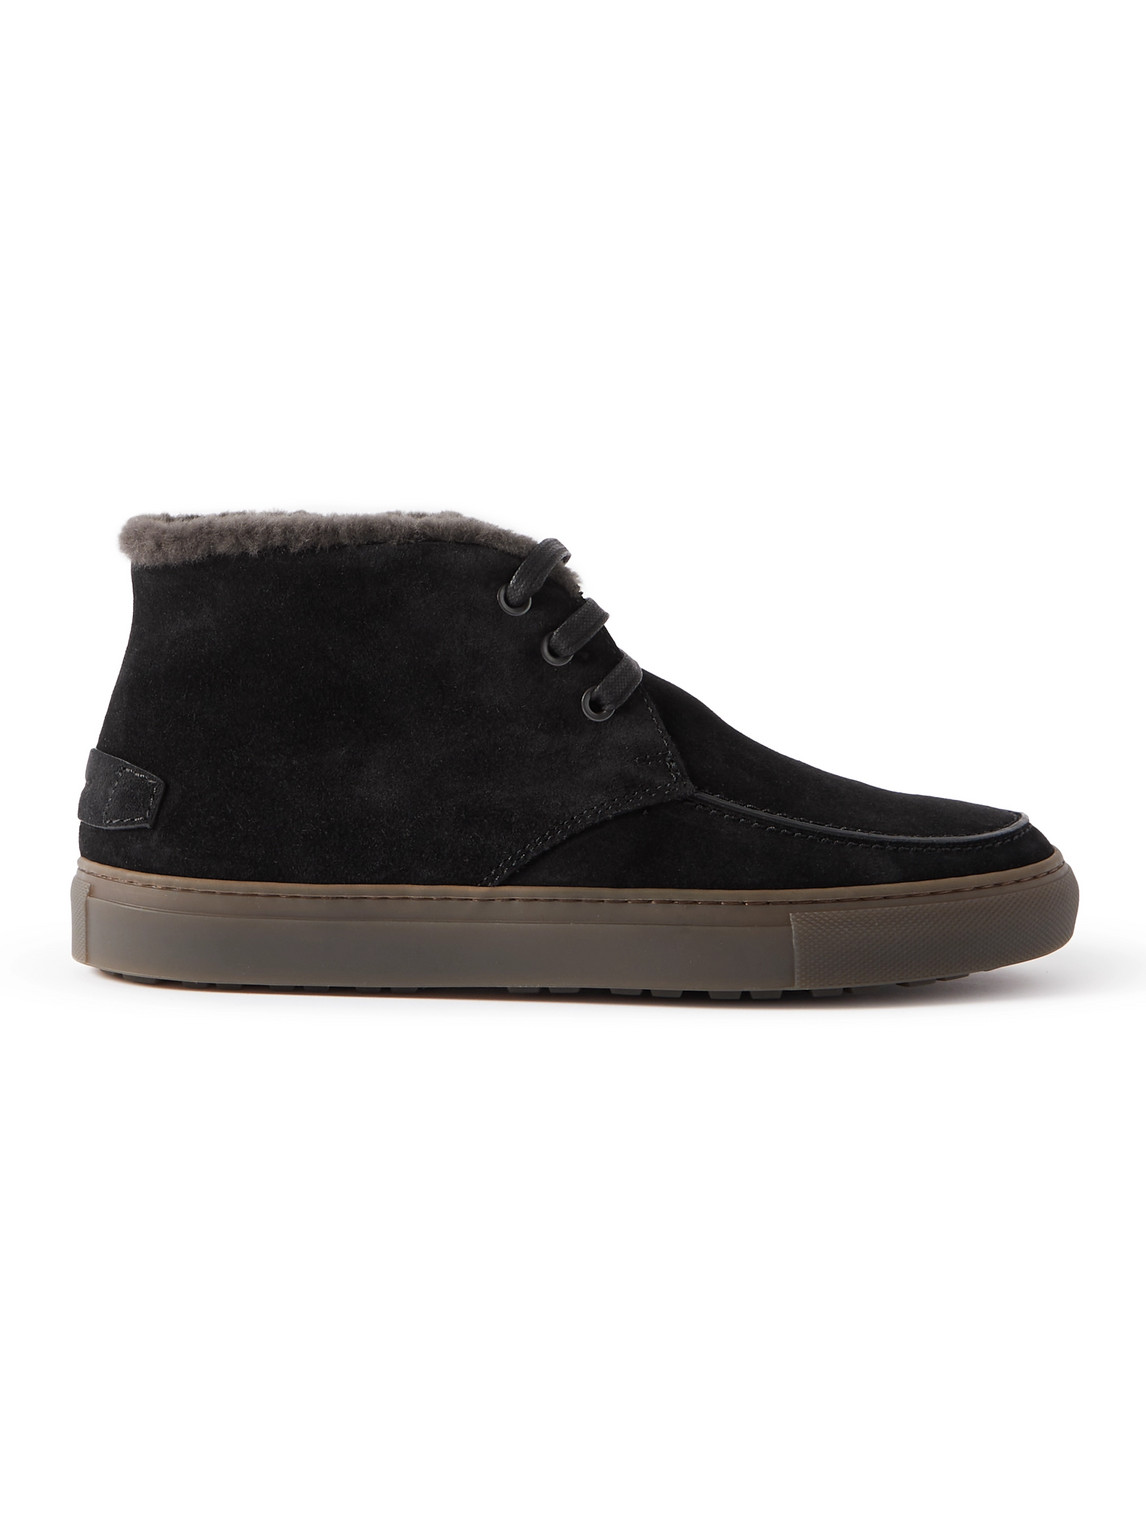 Brioni Shearling-lined Suede Chukka Boots In Black